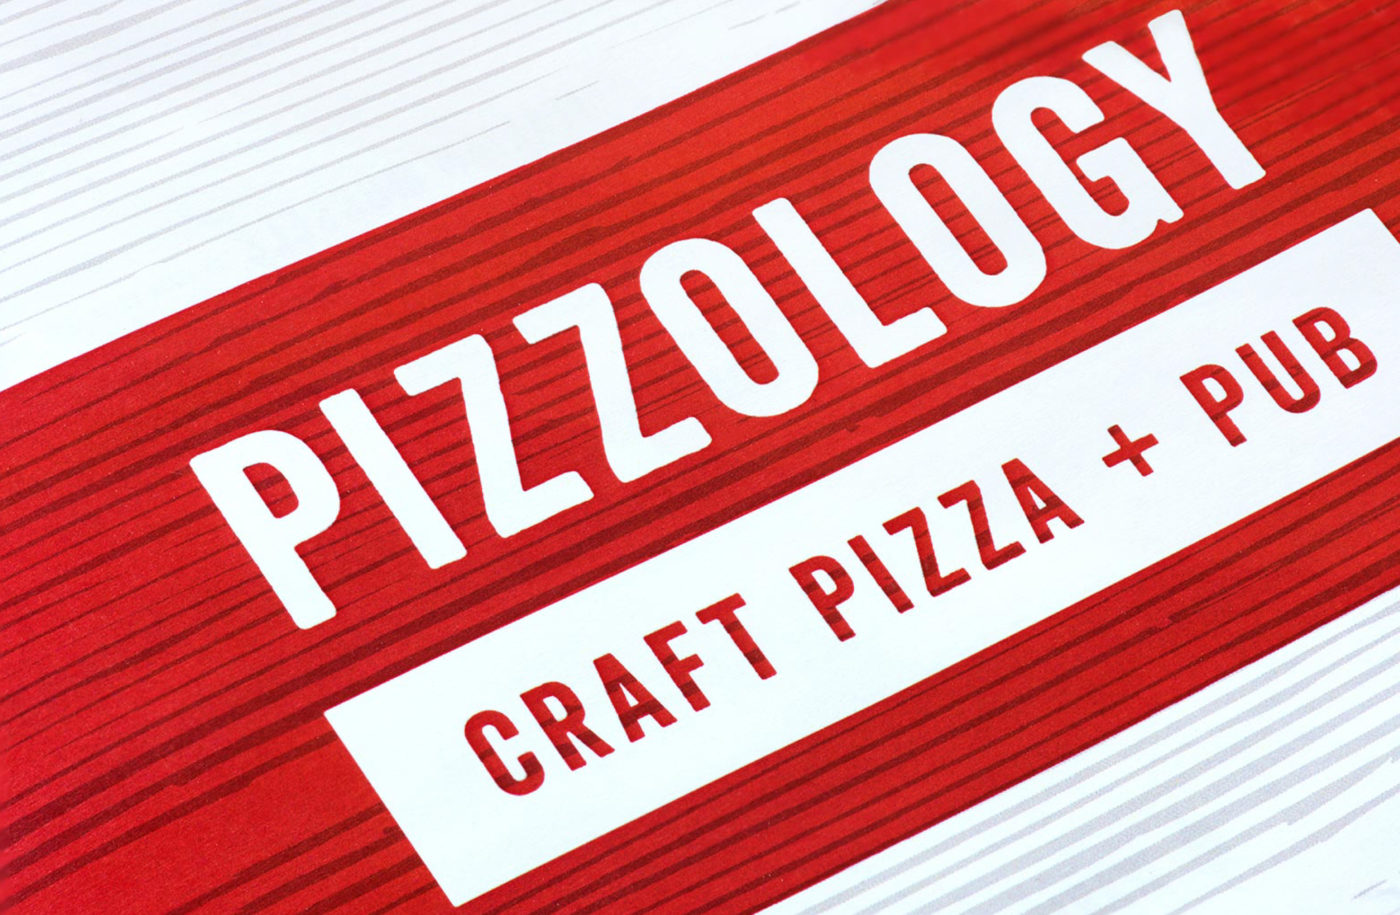 Pizzology Menu Design by CODO Design.